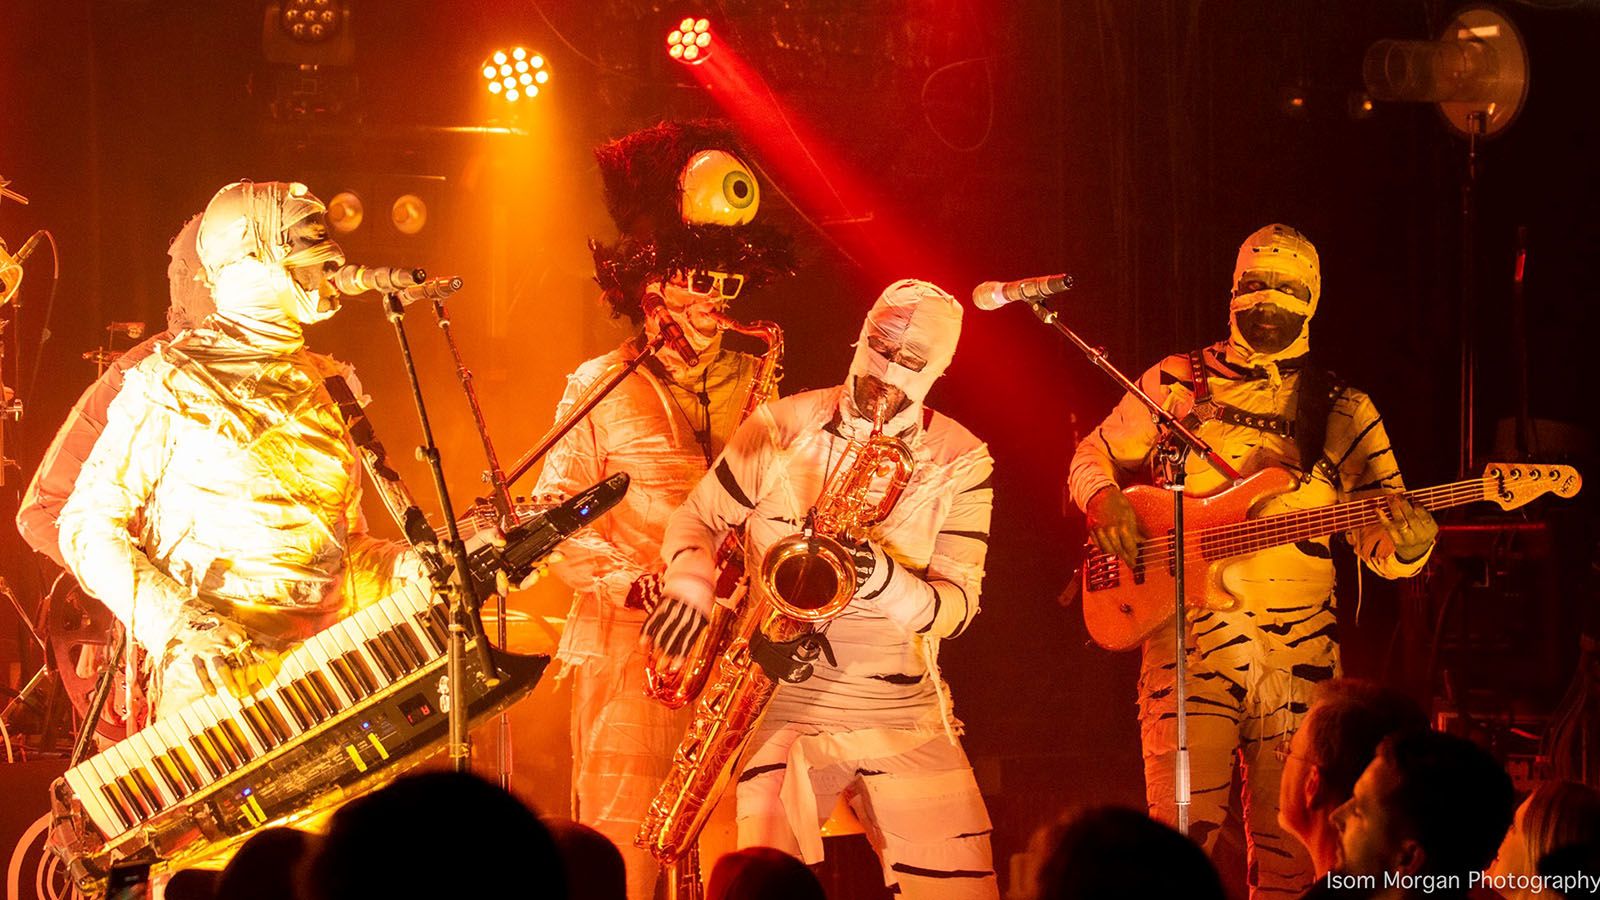 Here Come the Mummies will be at The Clyde Theatre on Oct. 22.